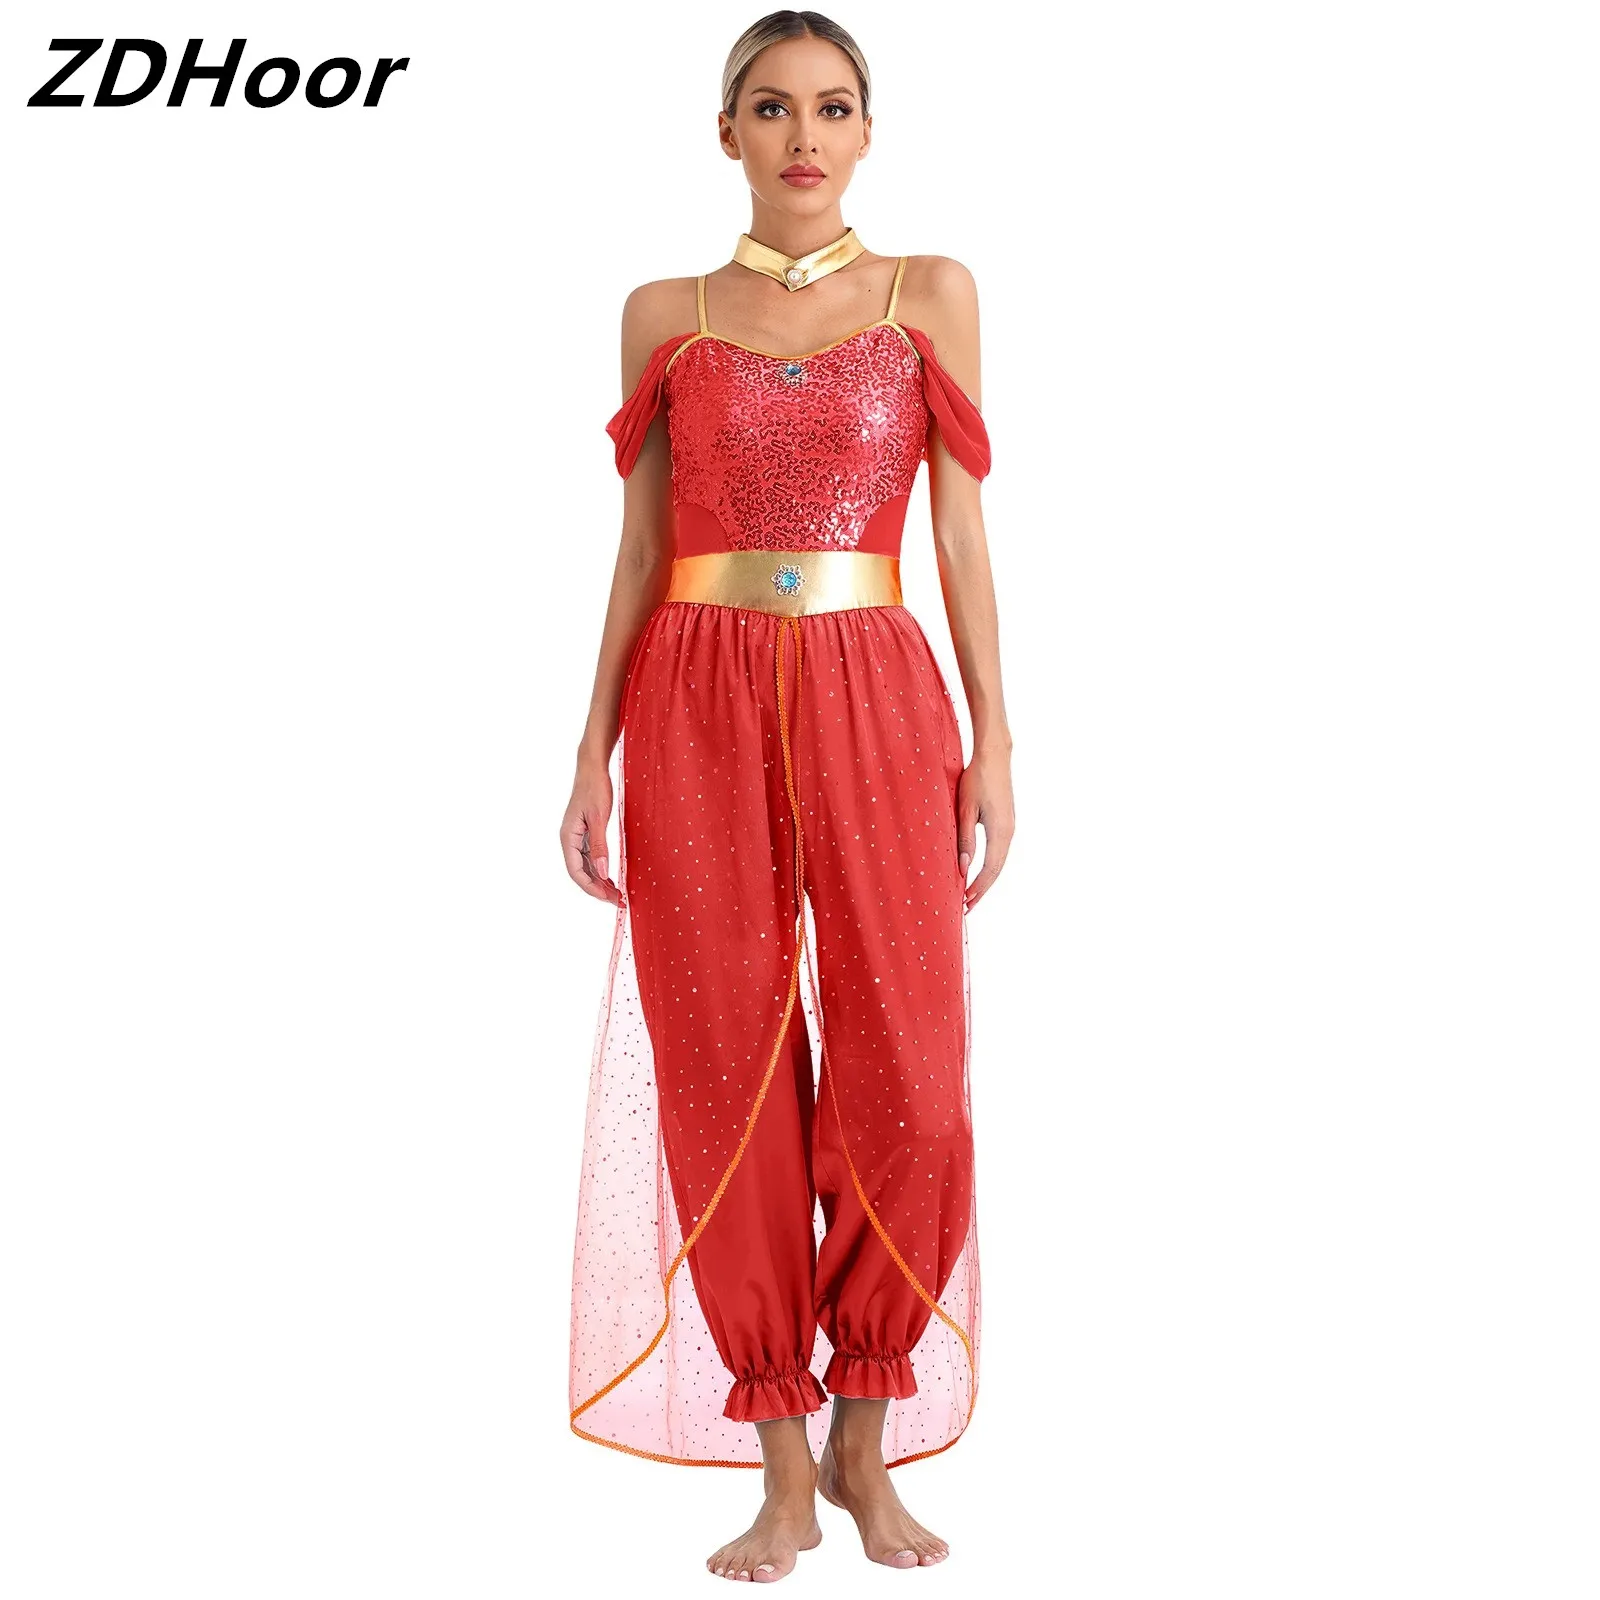 

Womens Belly Dance Romper Arabian Princess Role Play Gems Adorned Sequin Halloween Costumes with Metallic Shiny Choker Collar